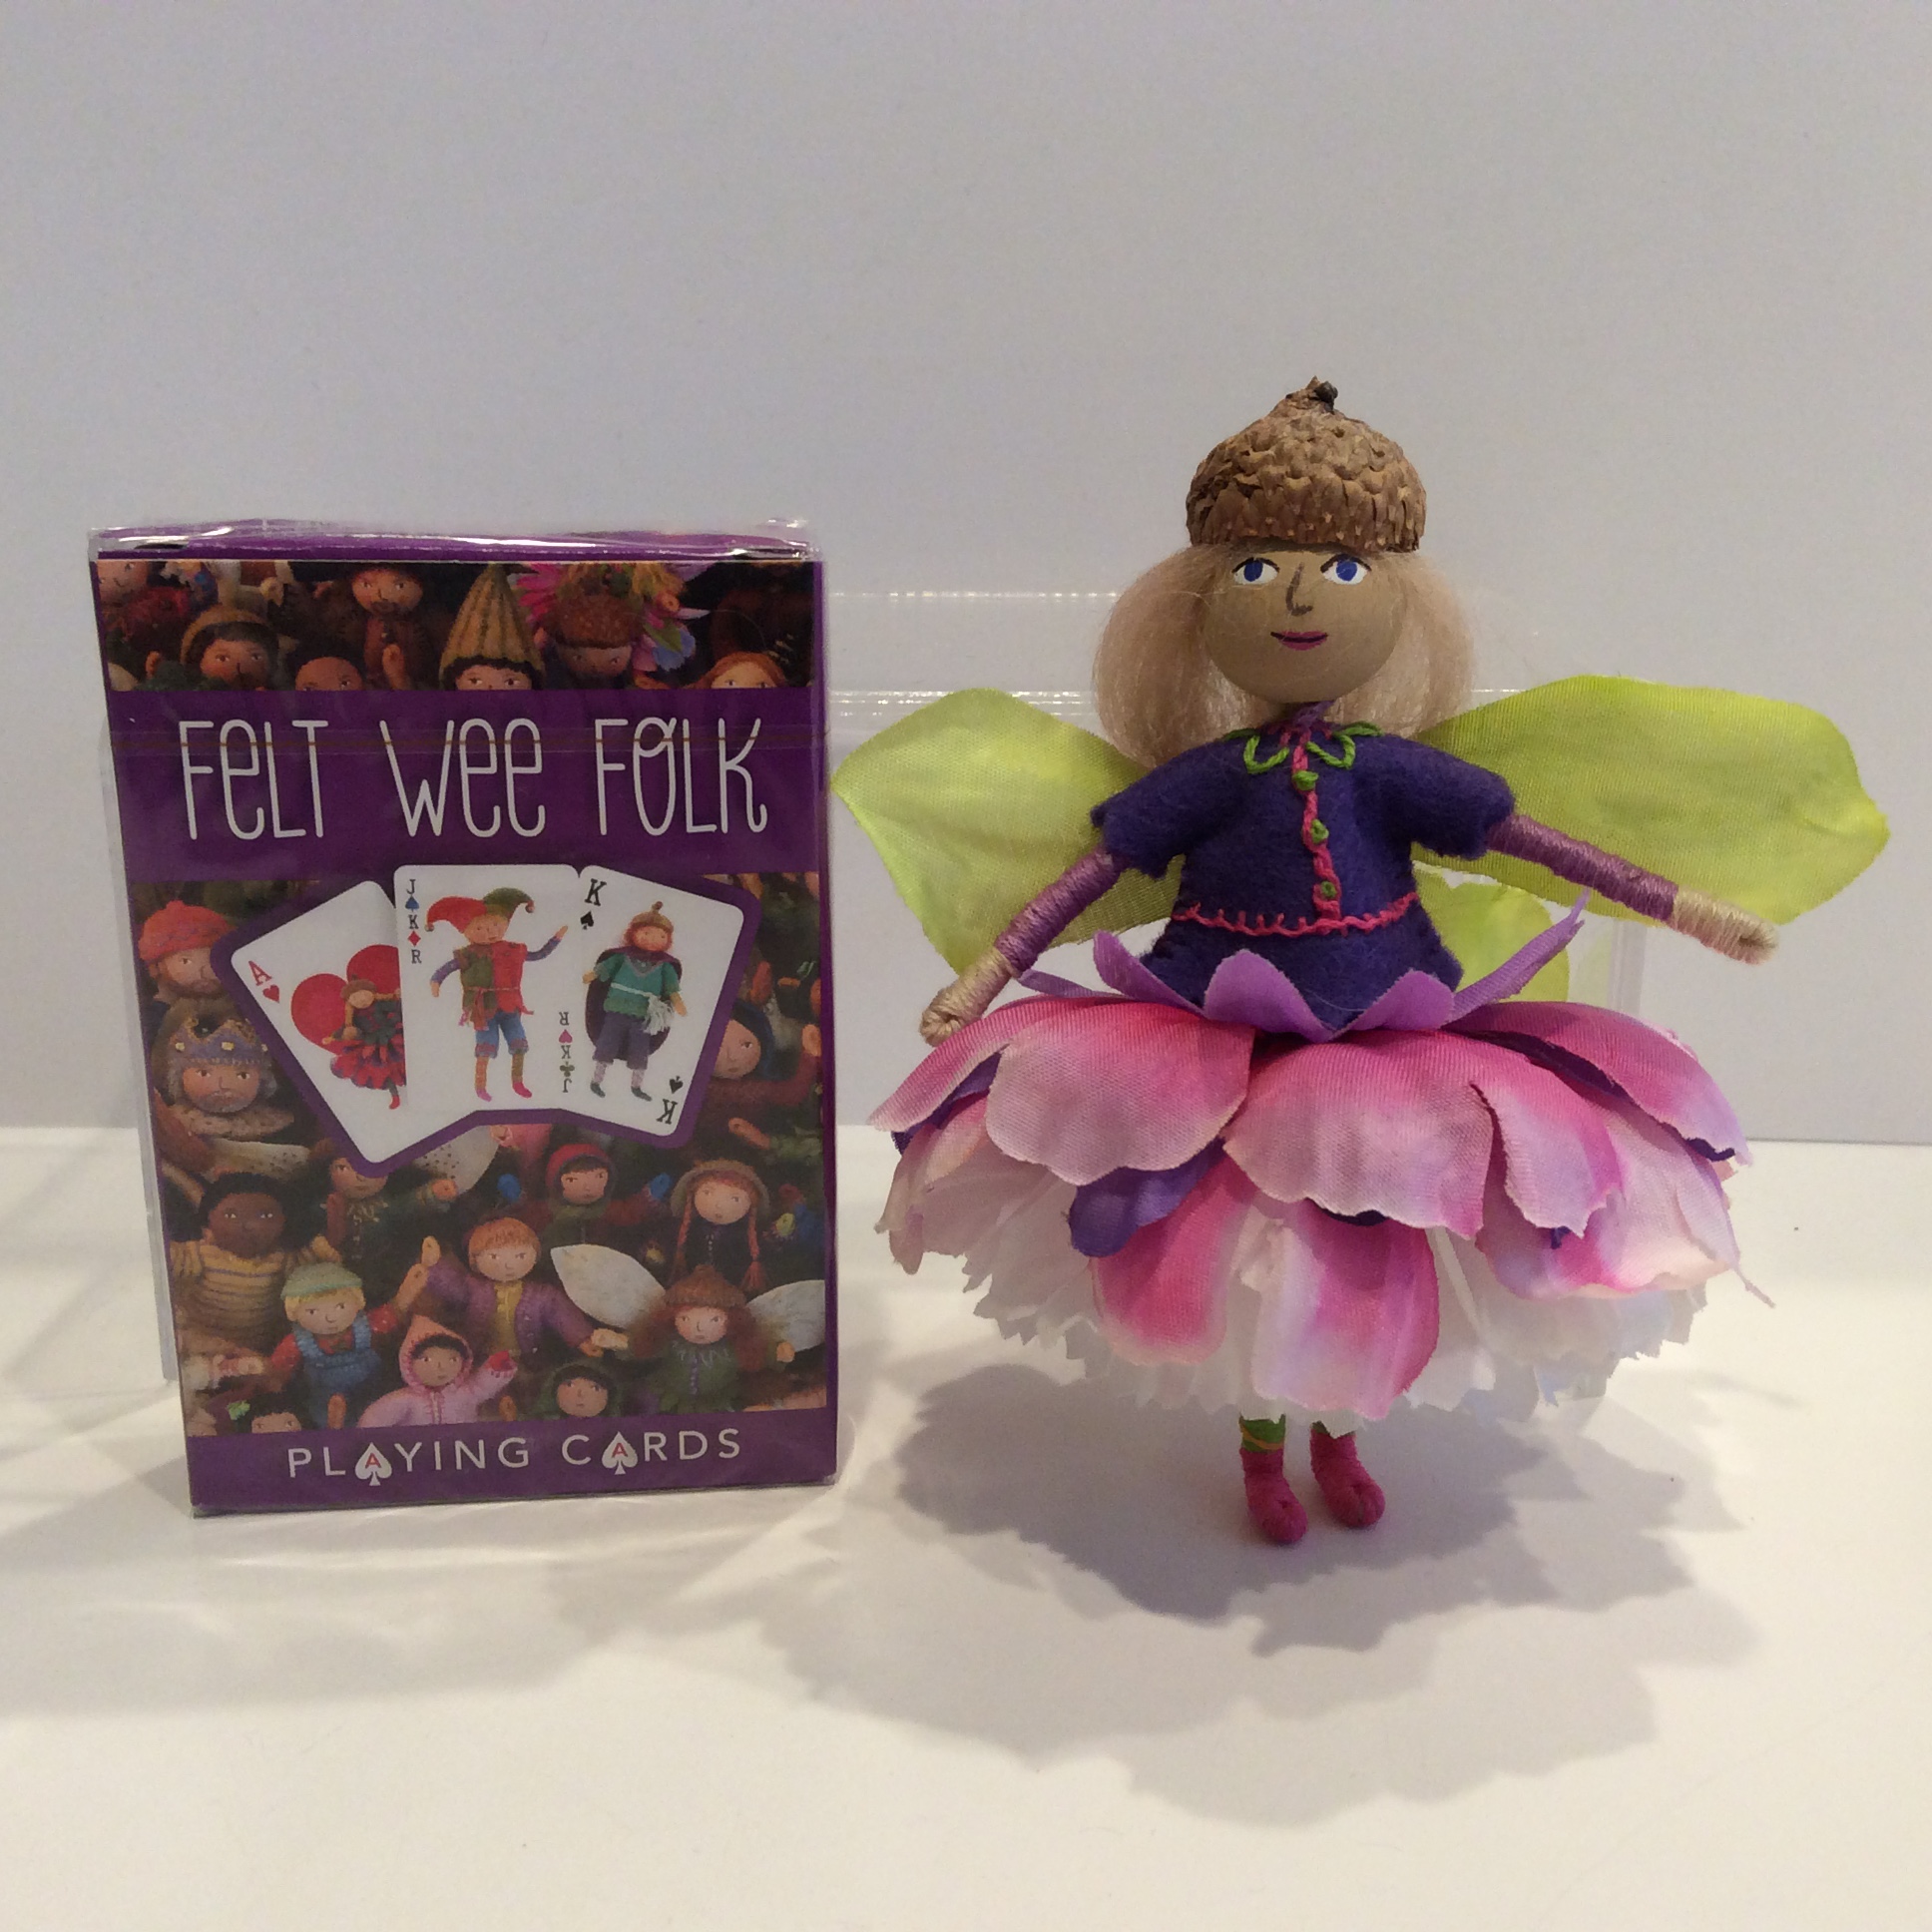 A deck of Felt Wee Folk playing cards next to a Blossom Fairy Doll